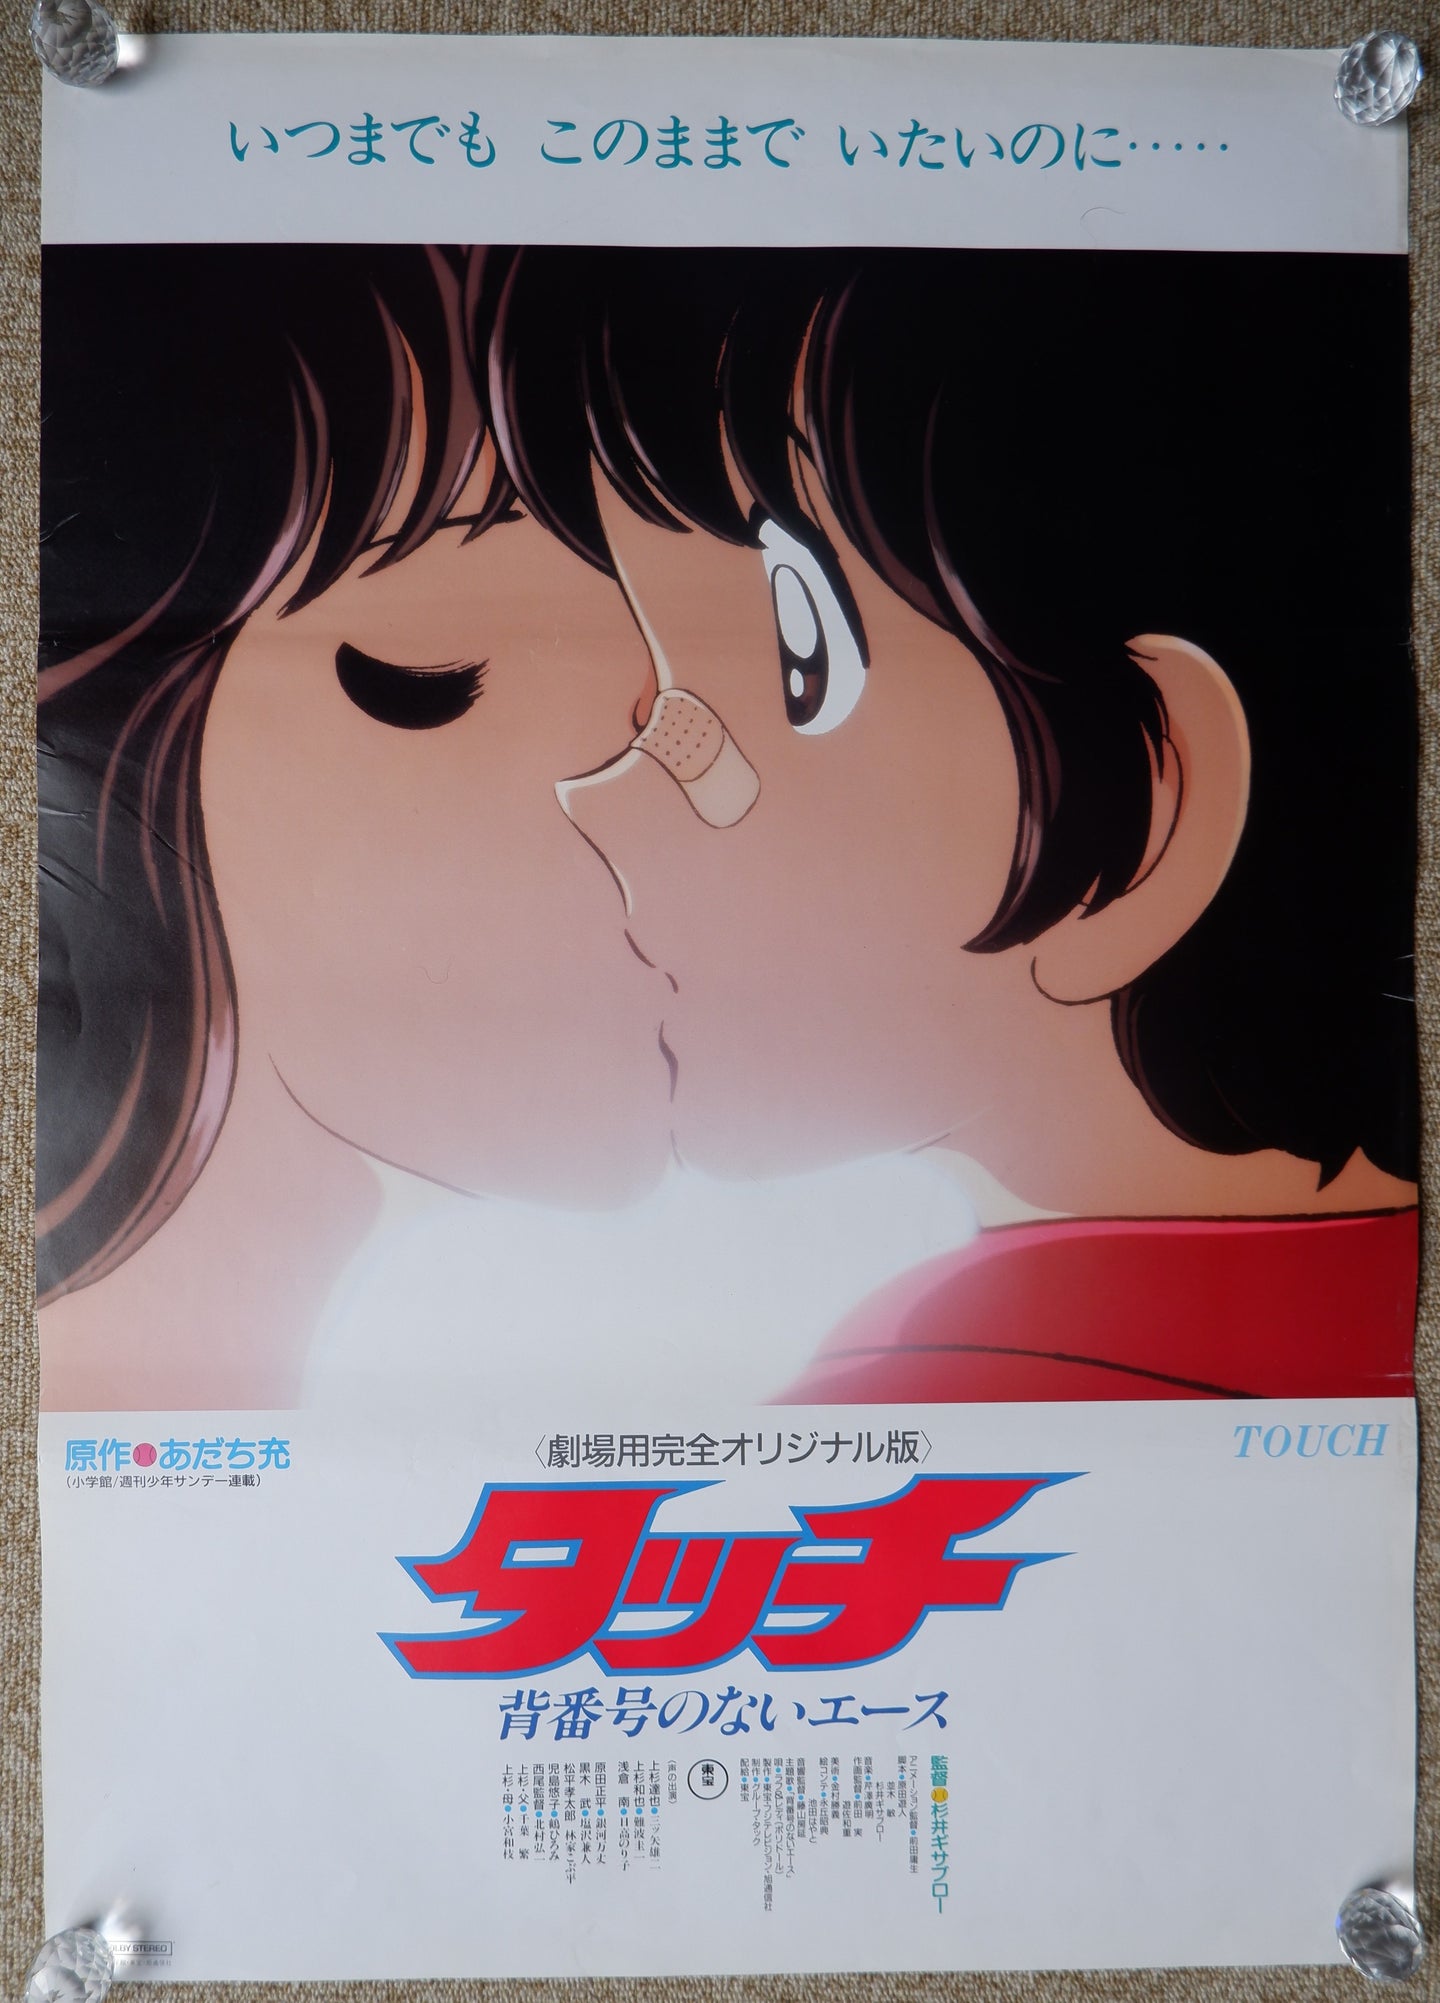 Touch Original Release Japanese Movie Poster B2 Size Japan Poster Shop